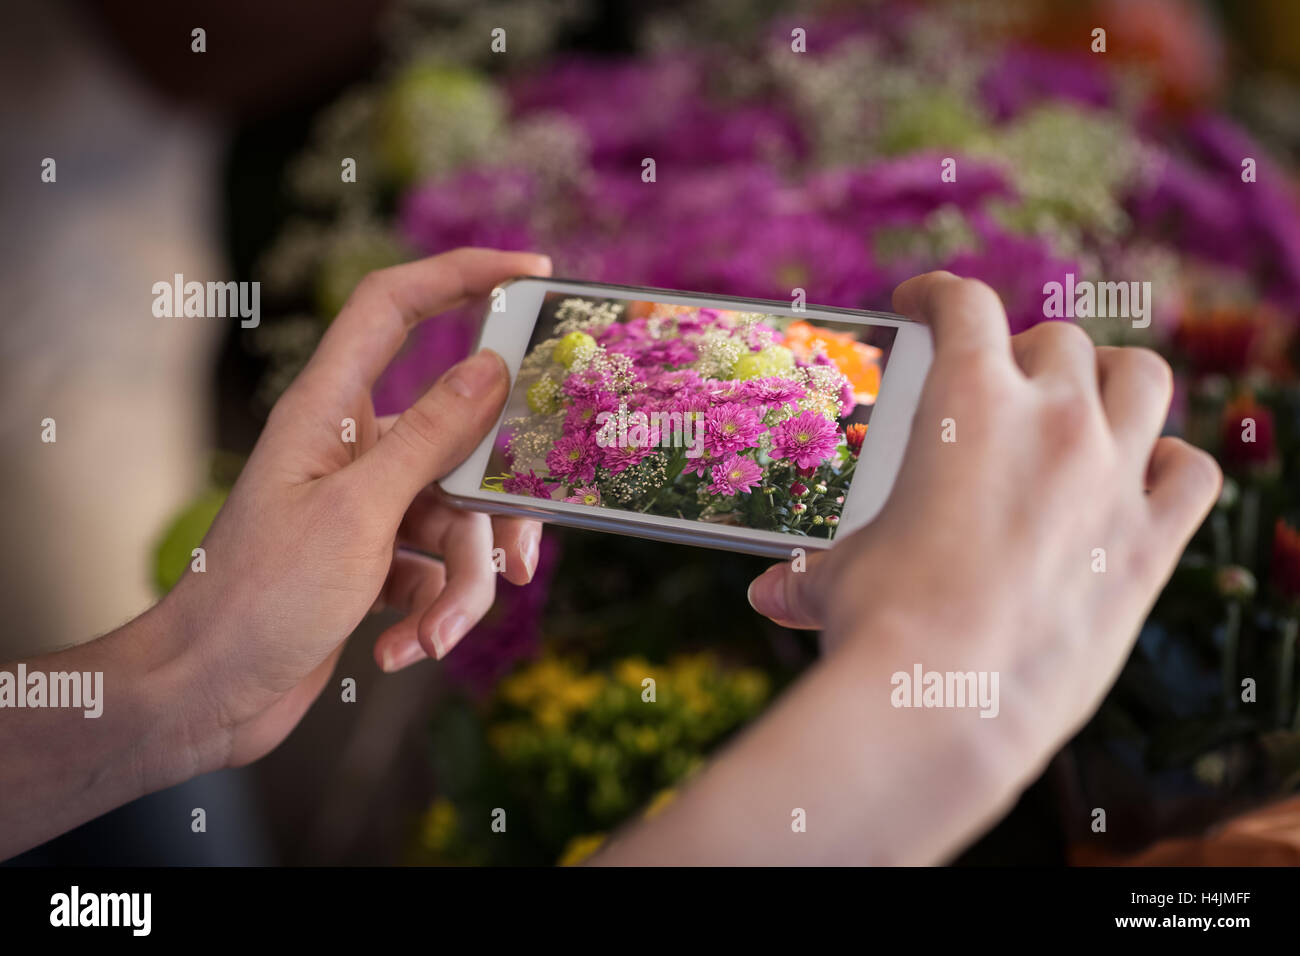 Woman's hand taking photograph of flower bouquet Stock Photo